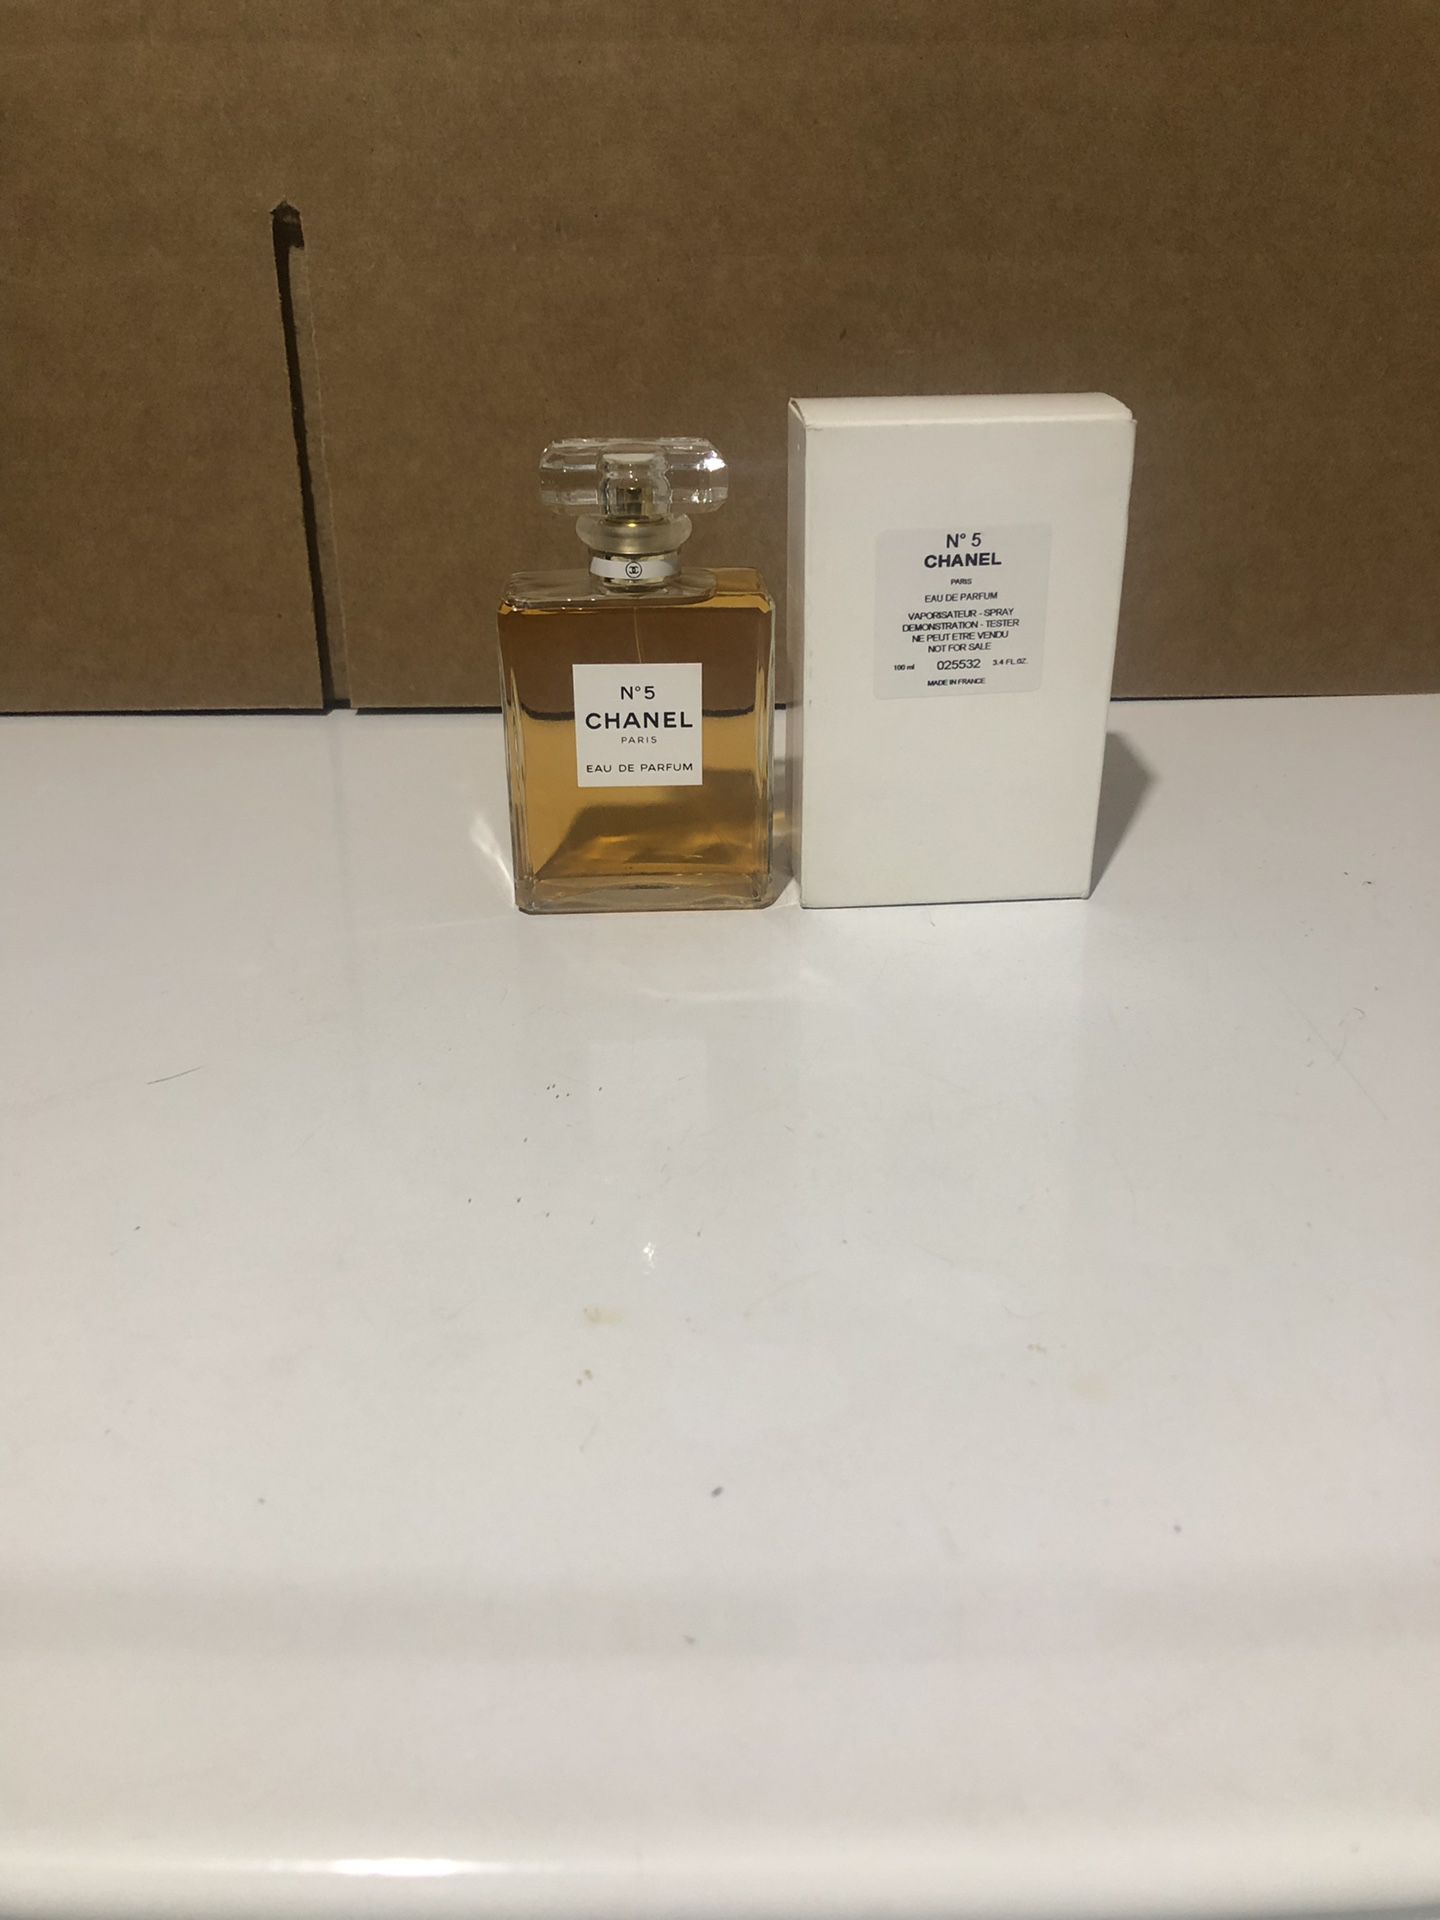 CHANEL N°5 EAU DE PARFUM 3.4oz w/ Tester Box (BRAND NEW) 100% AUTHENTIC!  READY TO SHIP! WOMEN FRAGRANCE PERFUME (RETAIL $135) for Sale in